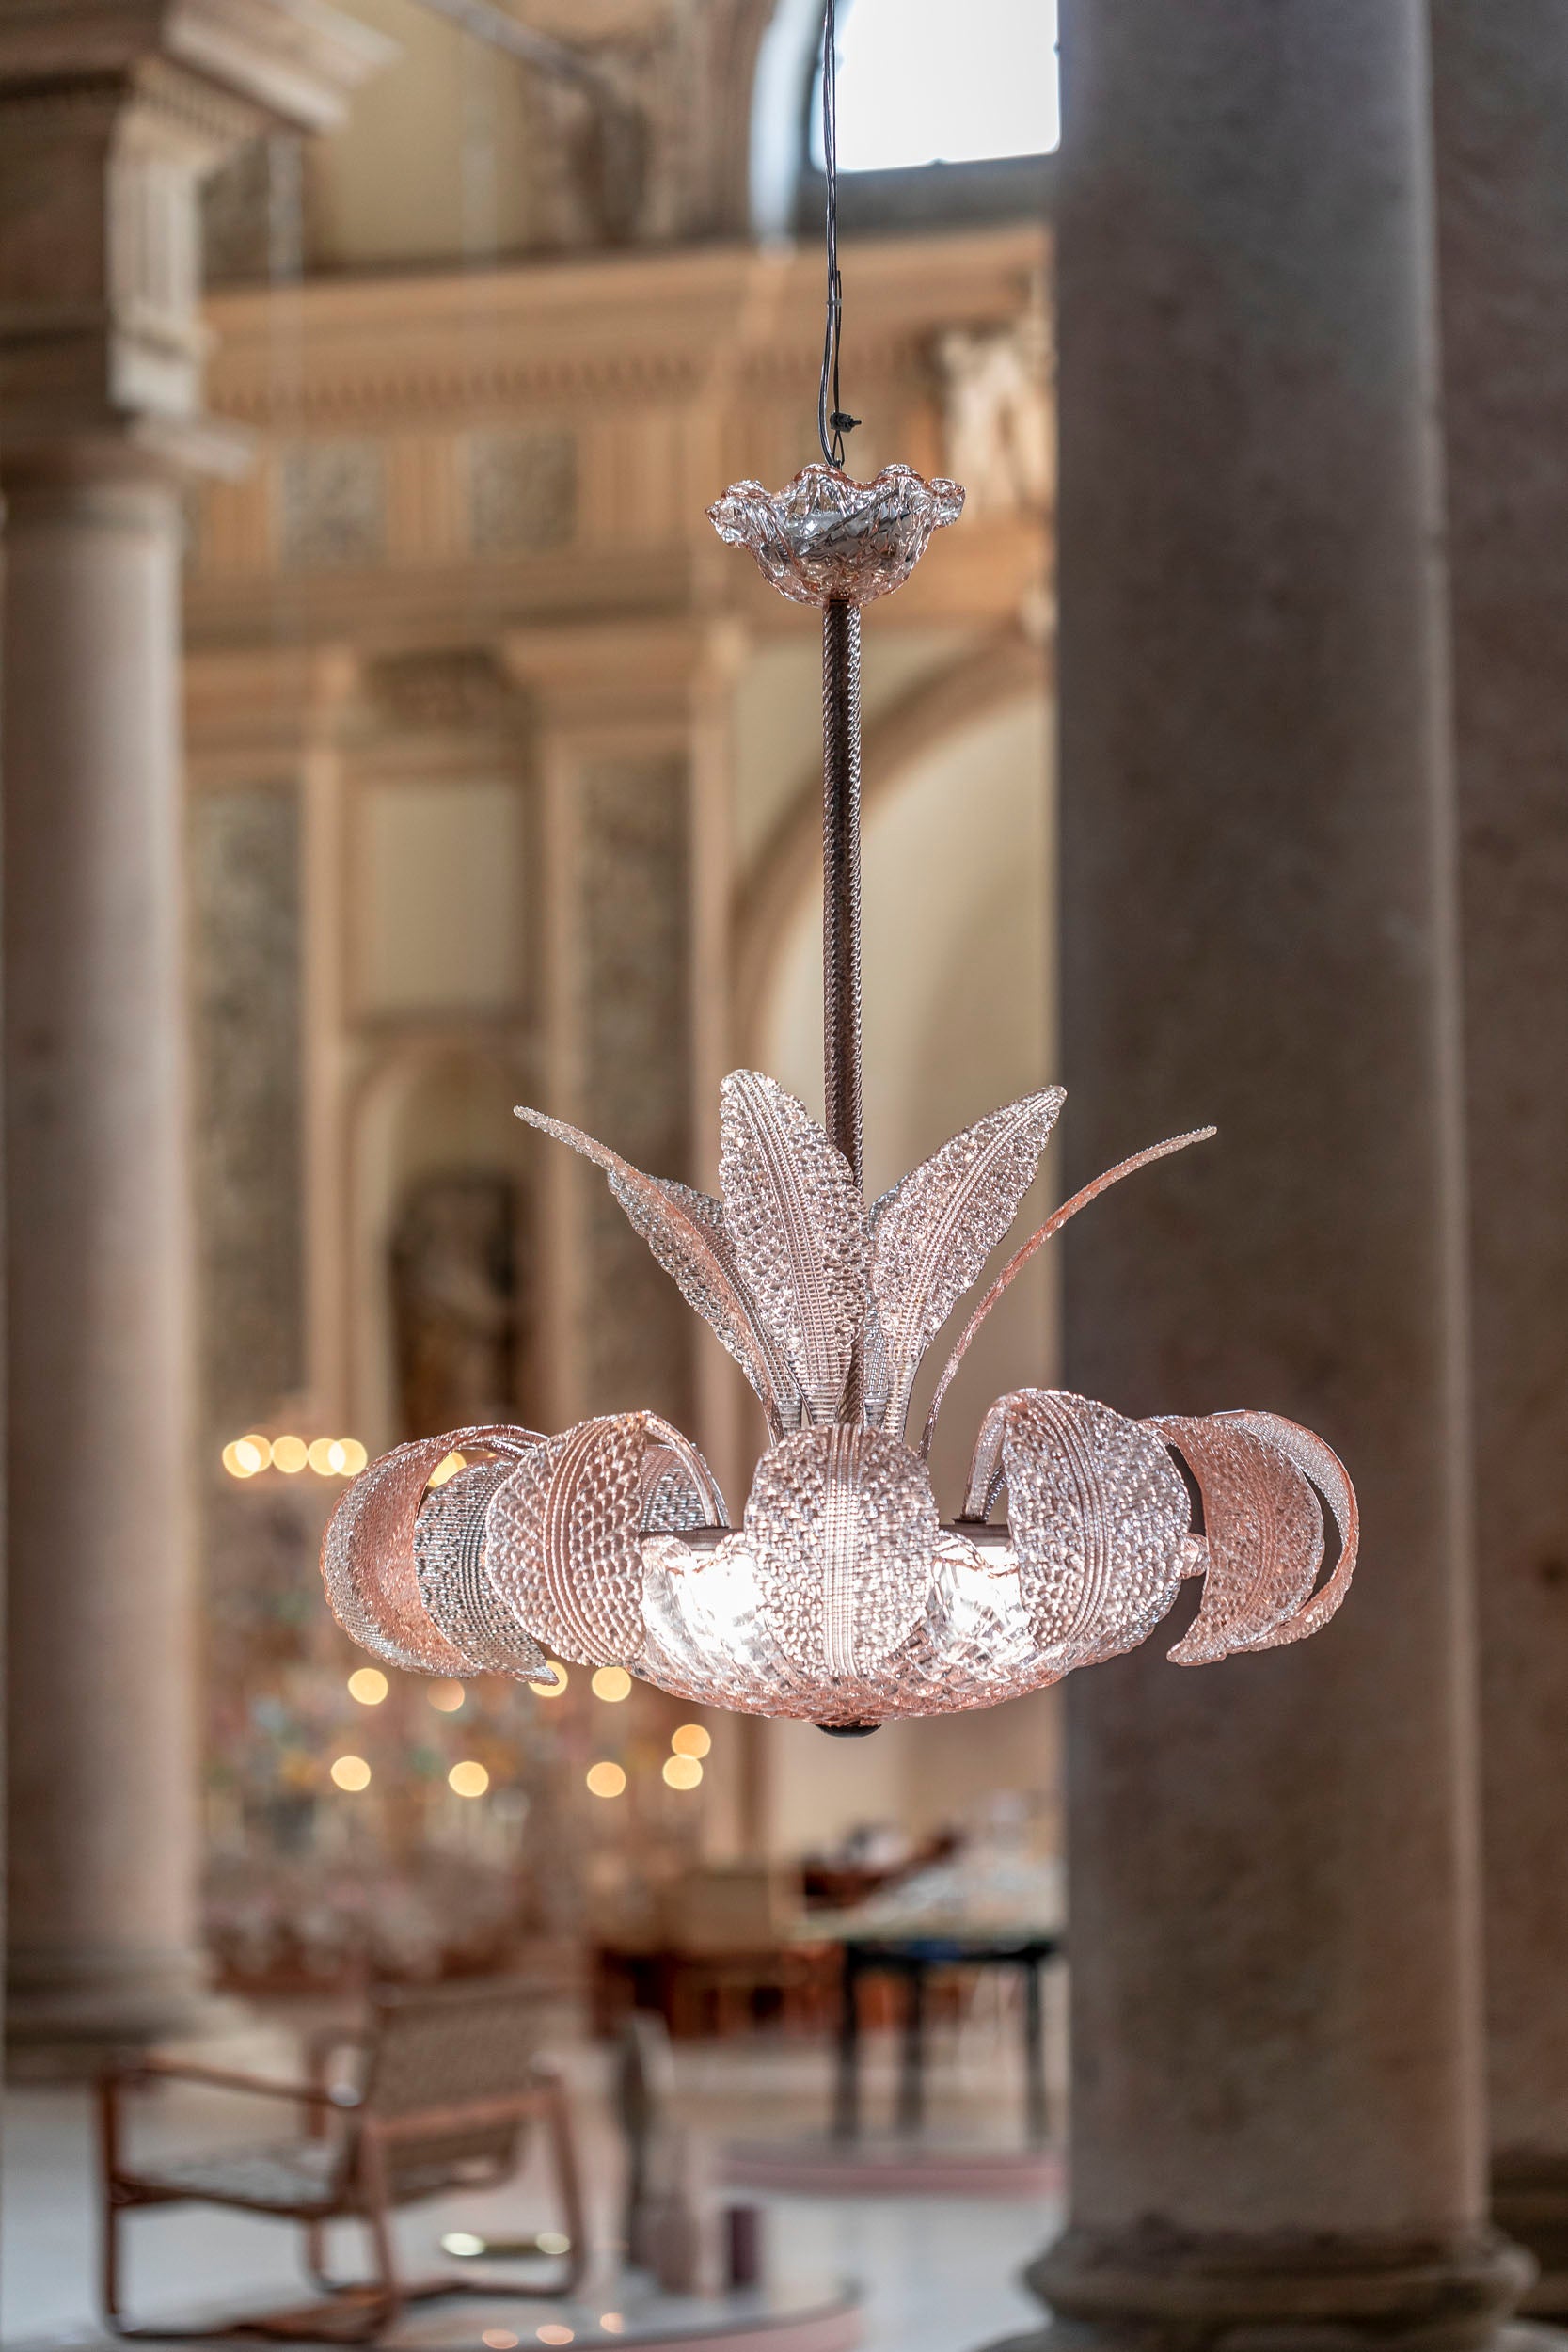 Rare and elegant Italian Ninfea chandelier in Murano glass by Ercole Barovier.
This italian hand blown glass chandelier presents fifteen large glass leaf and a center glass dish, the item is made in texture glass in the tone of light pink. 
Italy